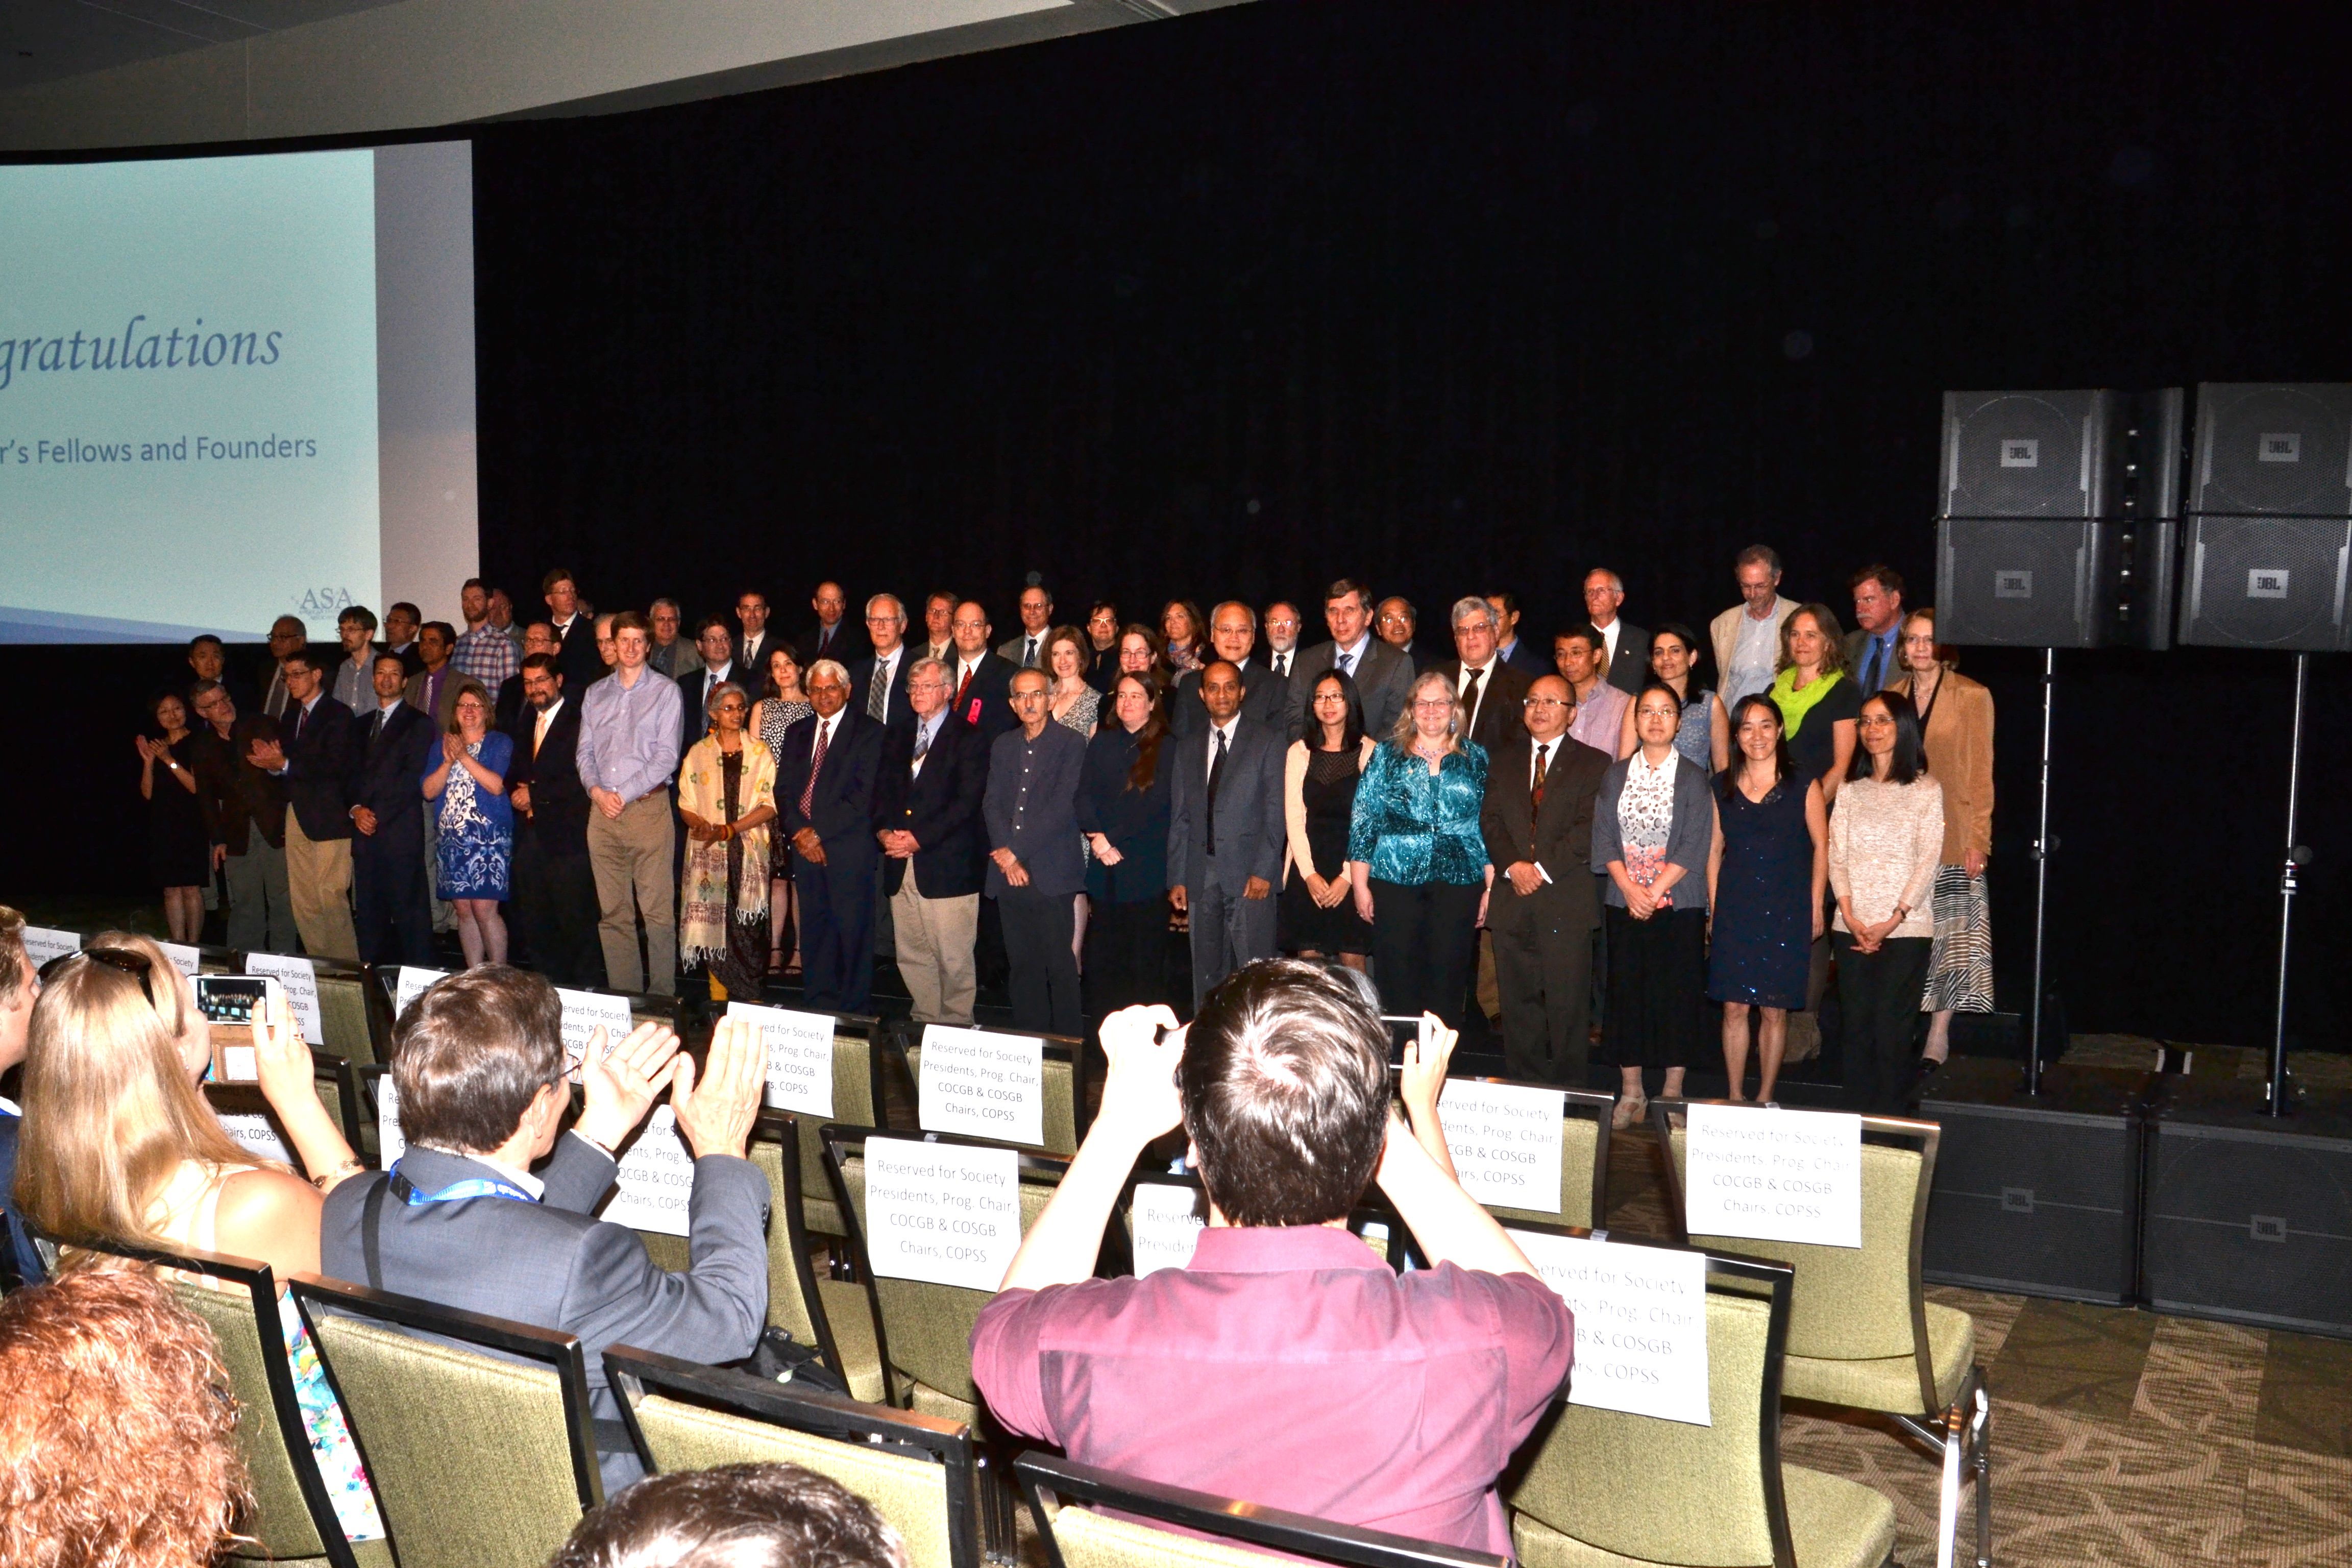 The ASA inducts 62 new Fellows from 24 U.S. states, DC, and six countries. 